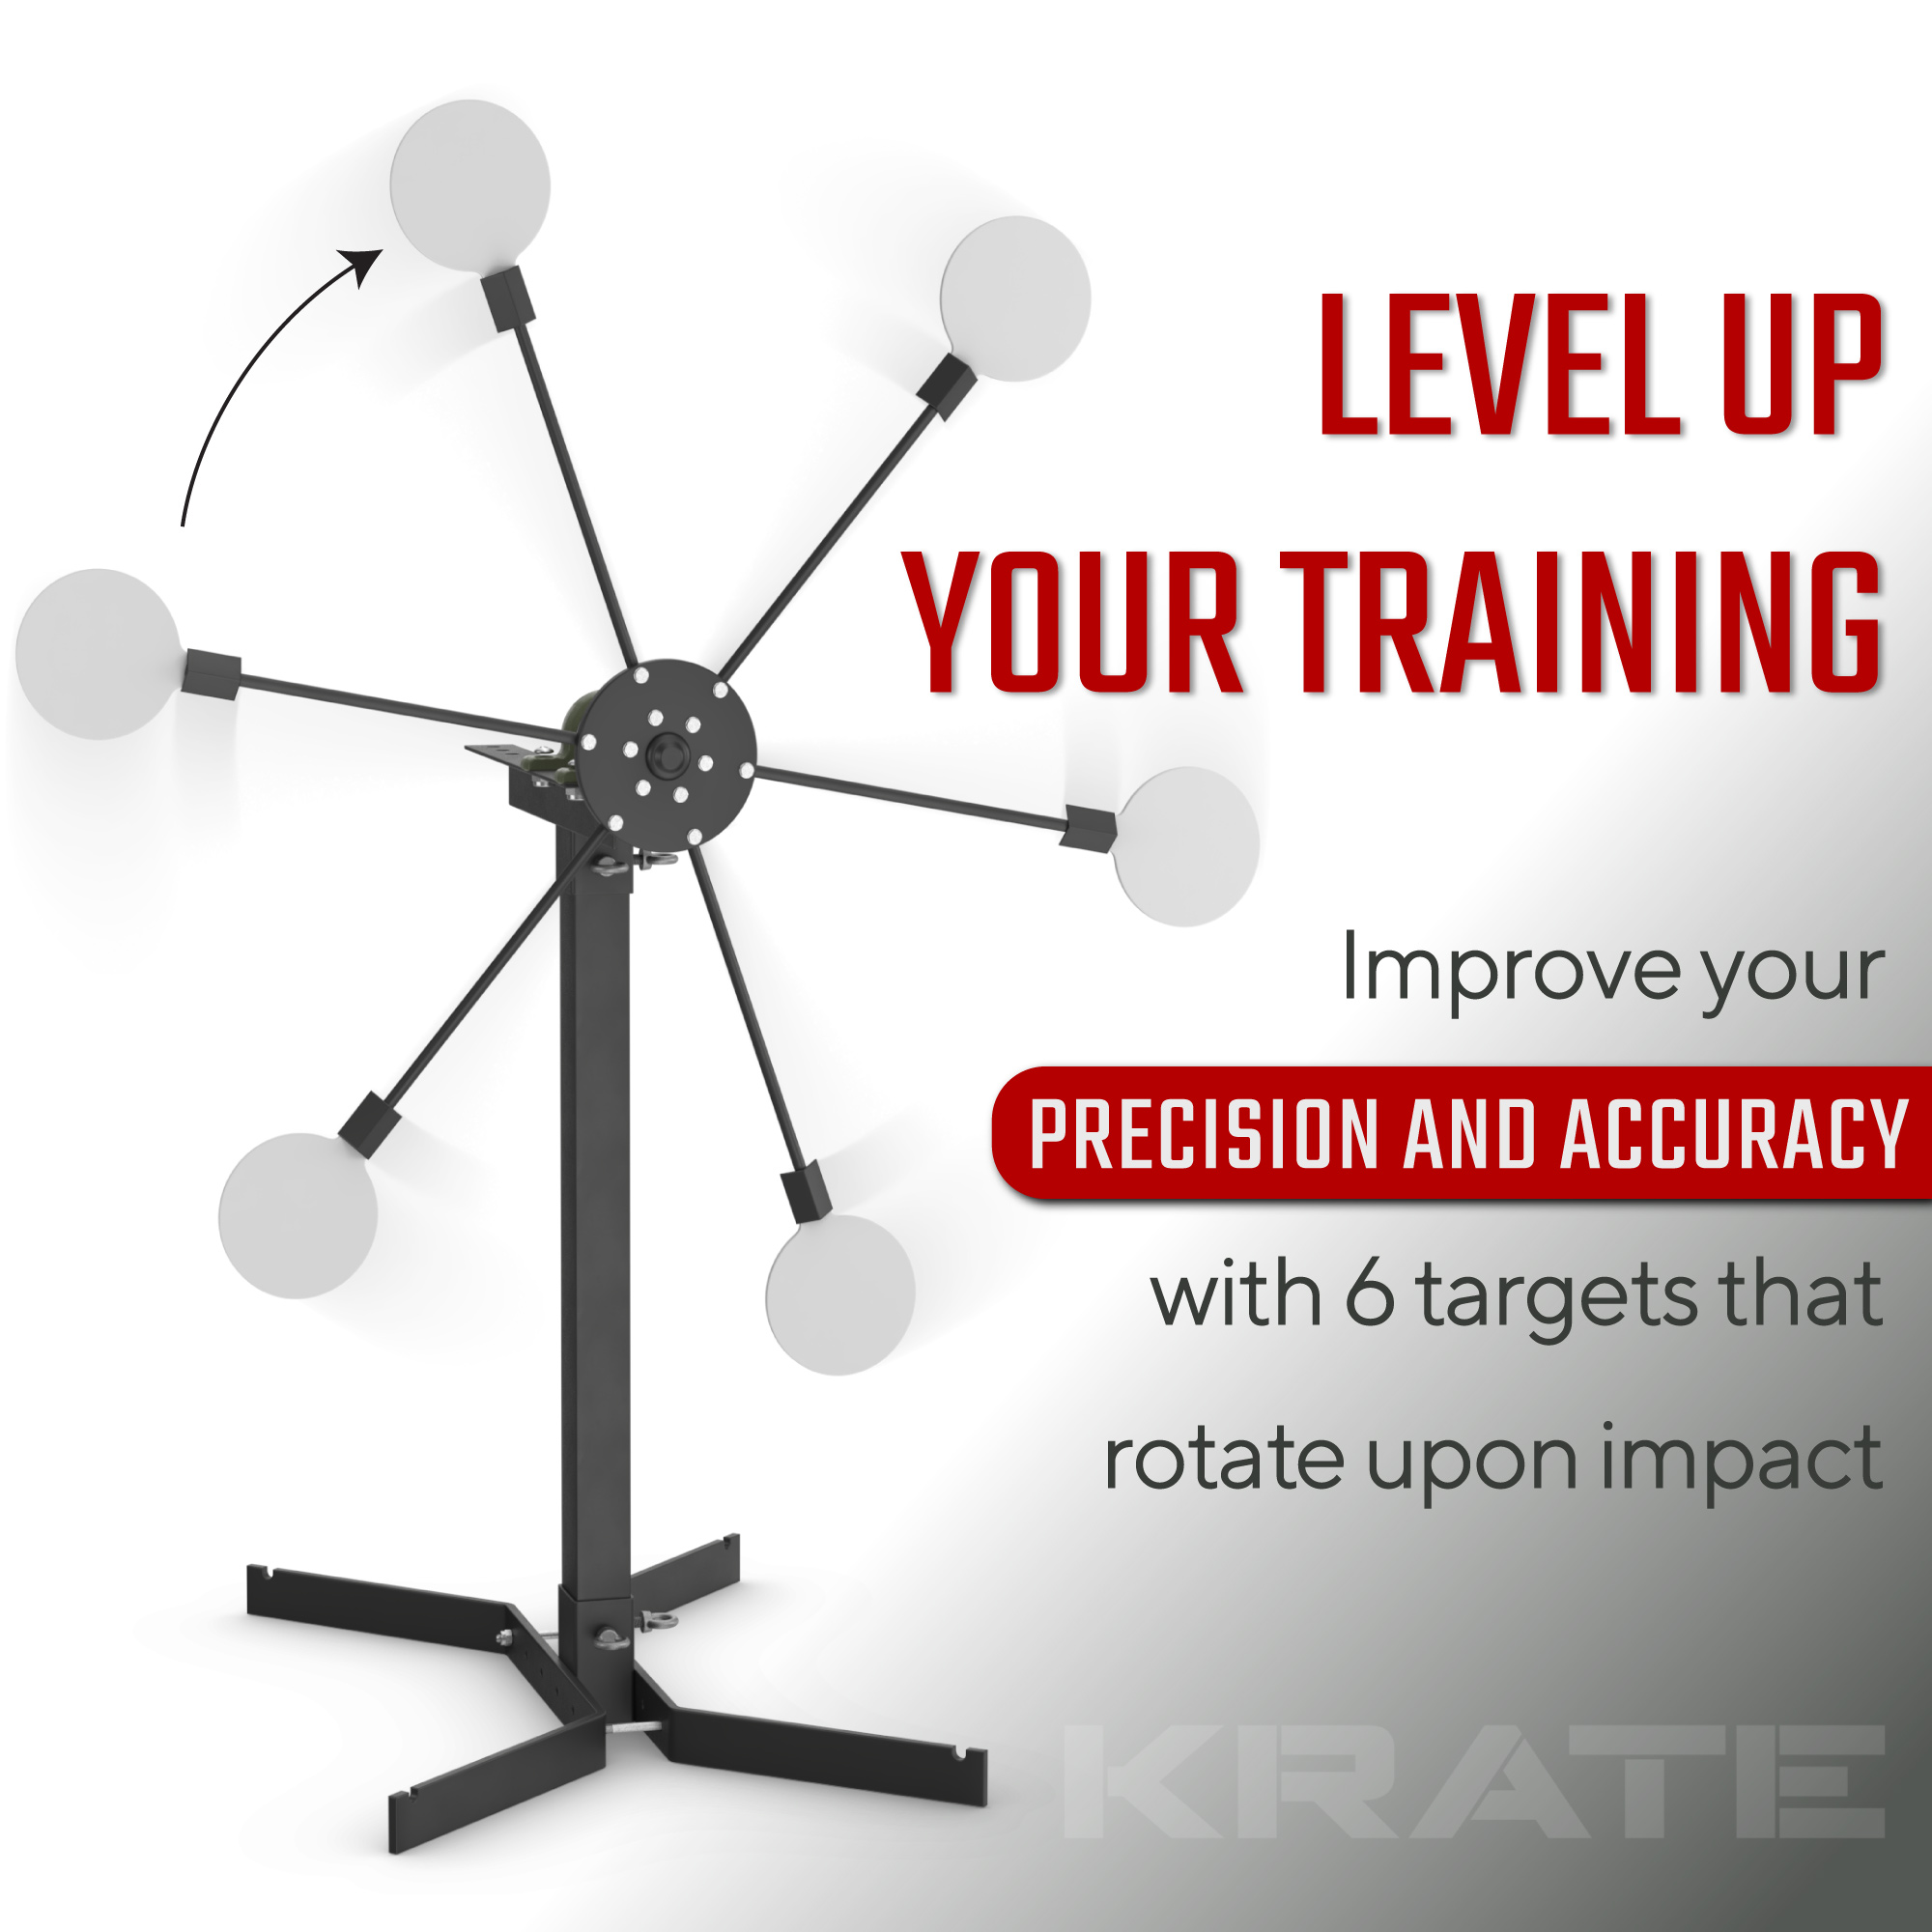 Level up your training Texas Star